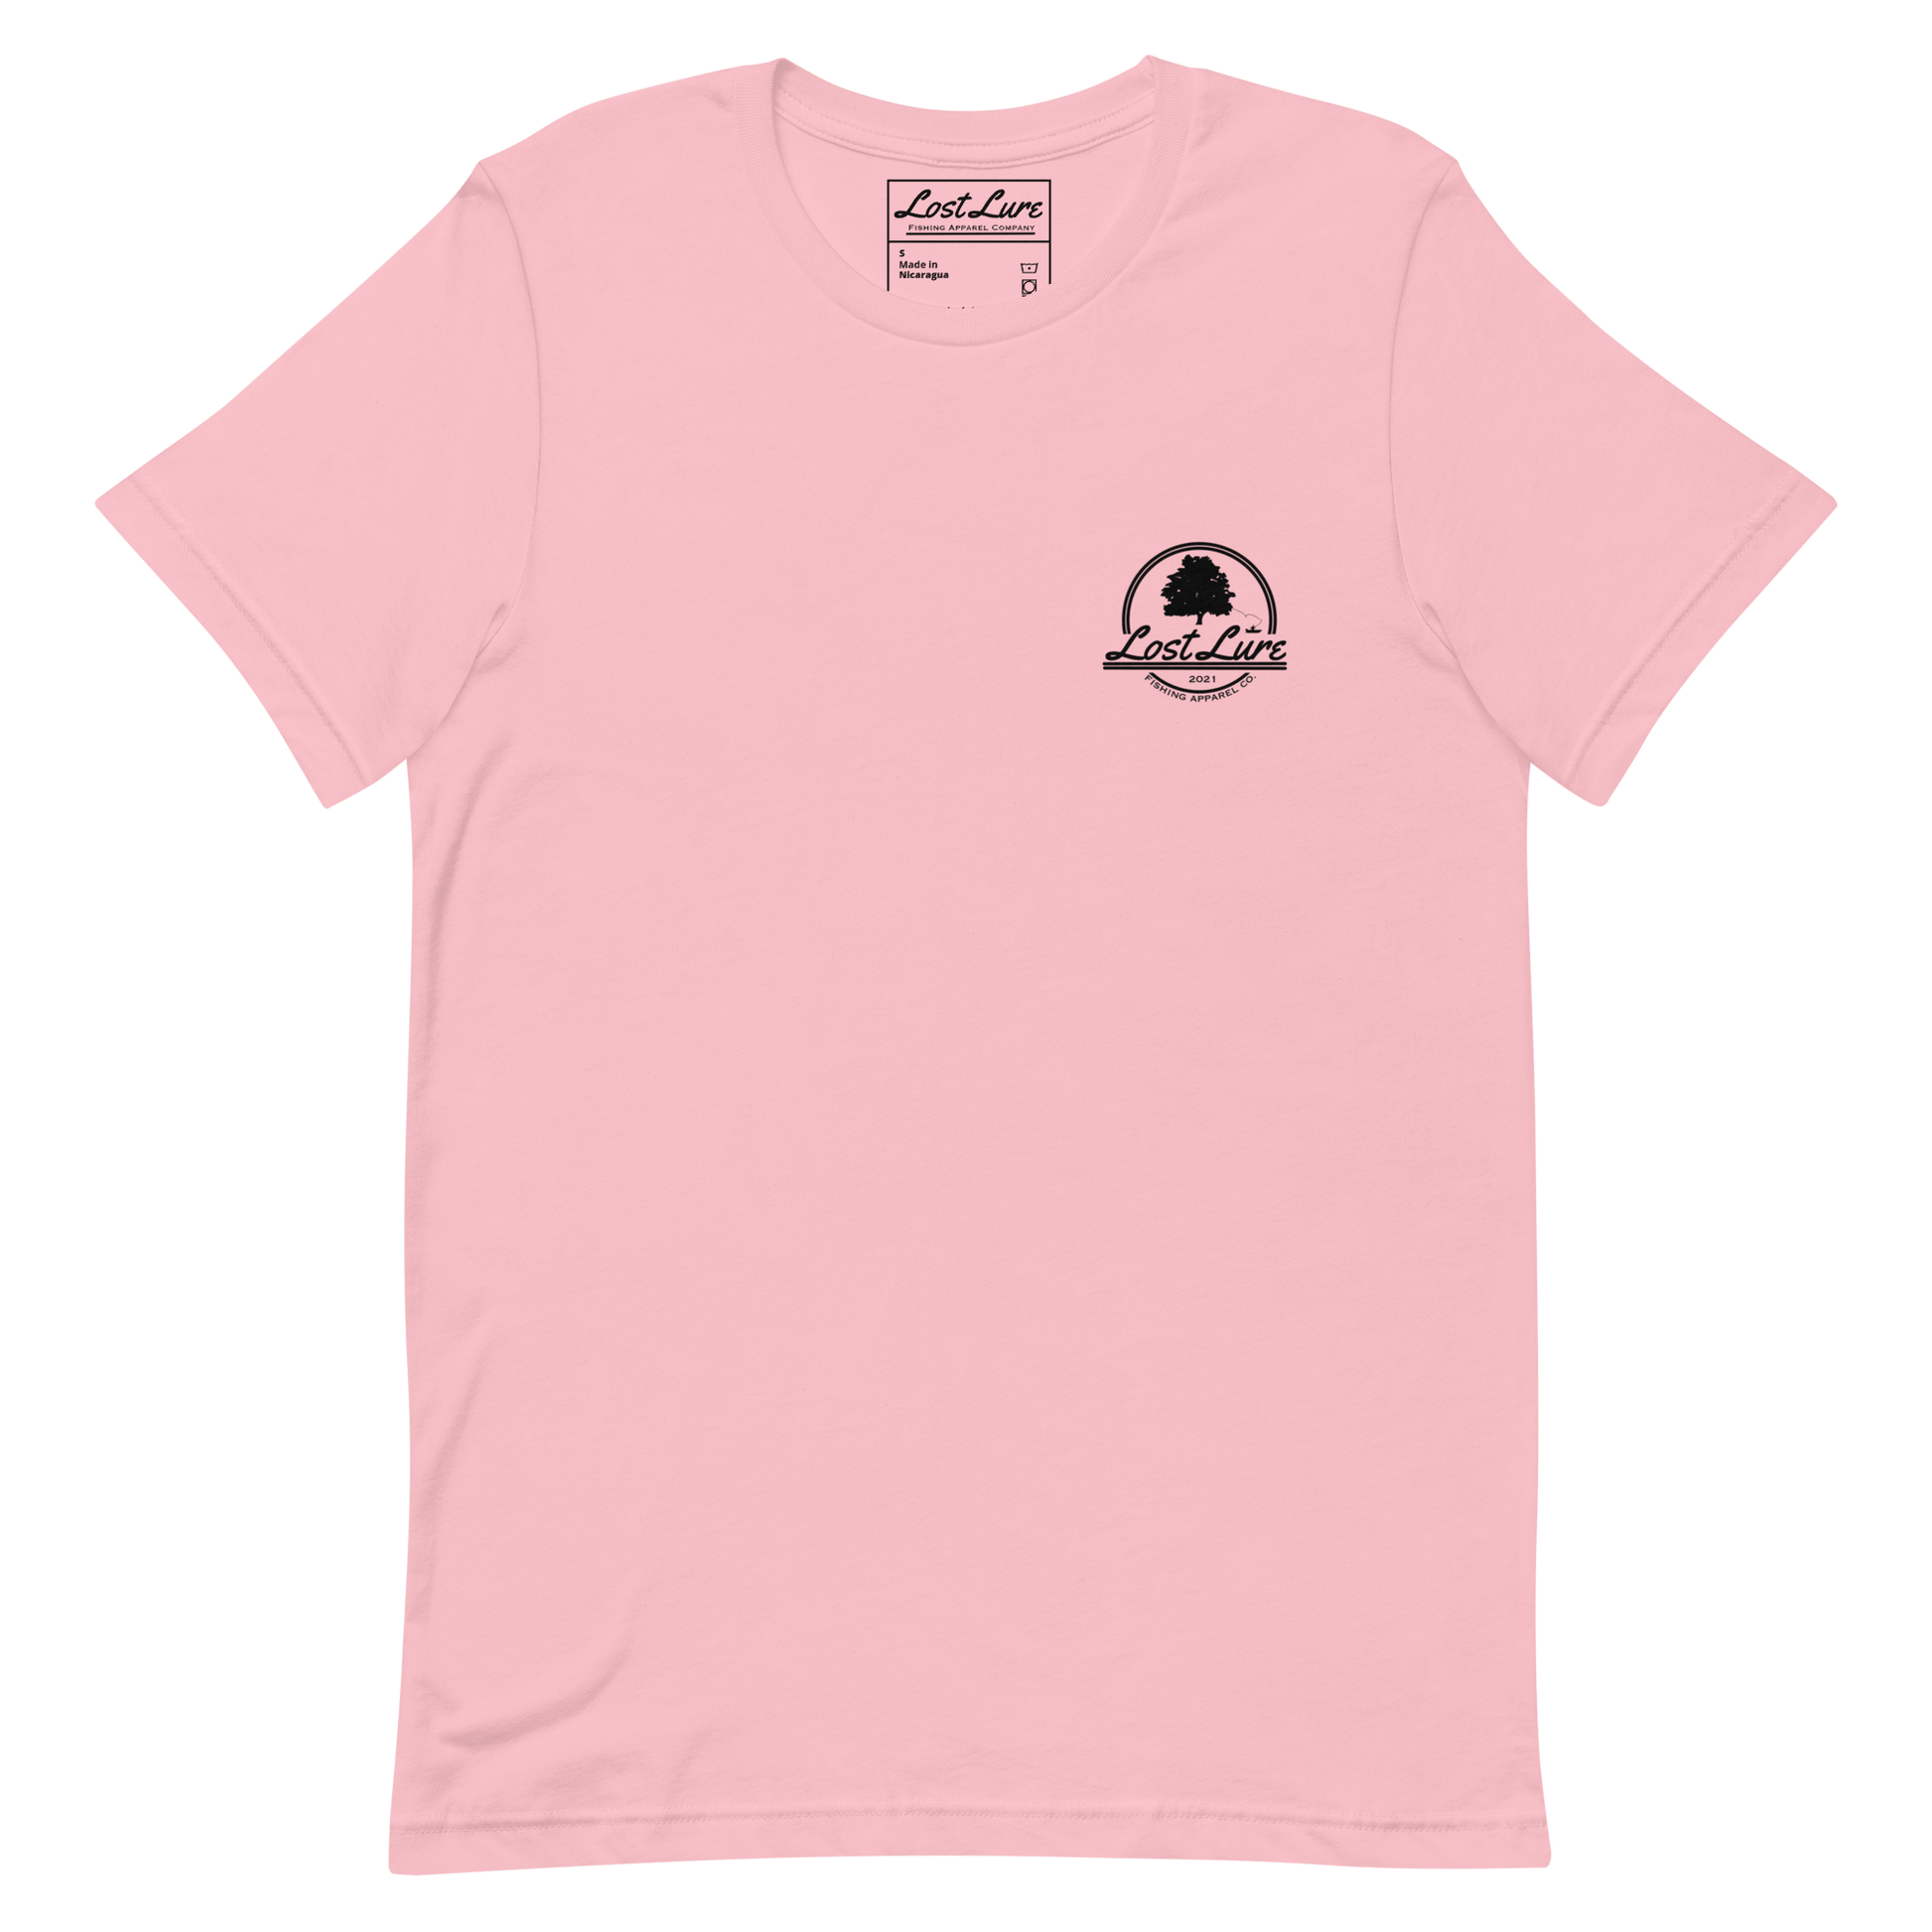 Bass fishing shirt. It has a drawing of a fat bass and it reads “lost lure co, catch fat fish”. The bass design is on the back, the lost lure logo is on the front. Pink woman’s shirt, front side